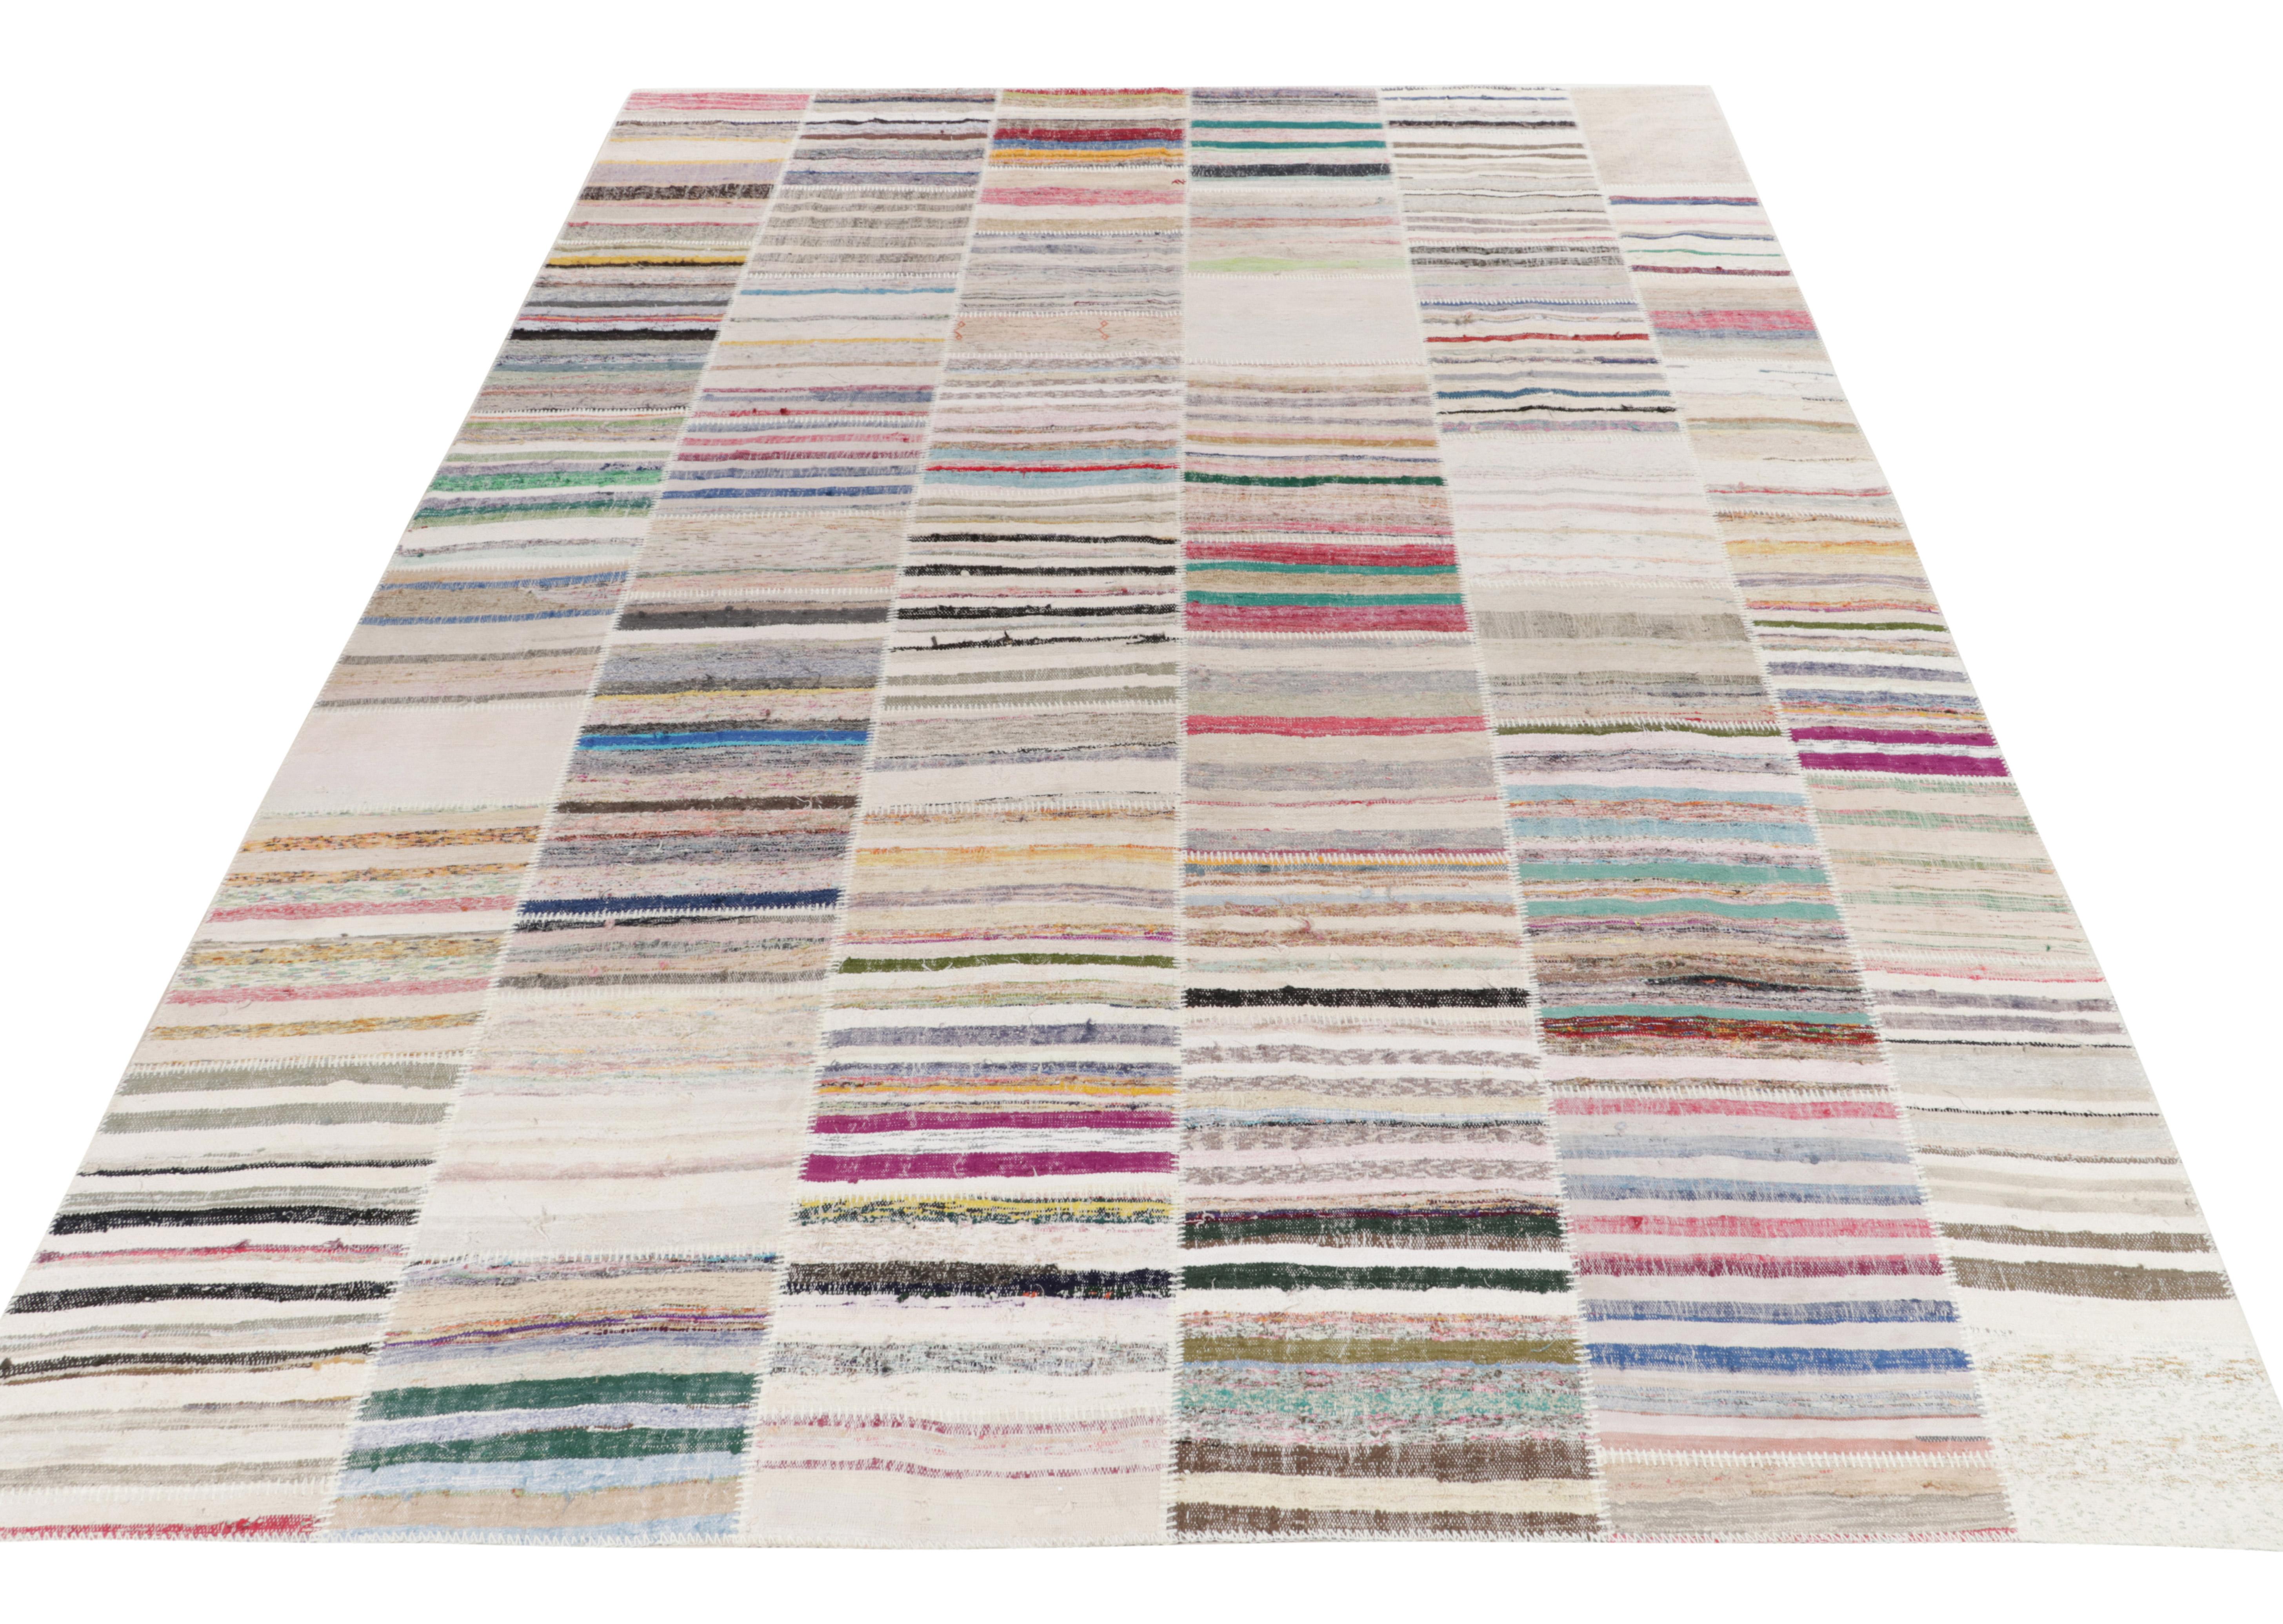 Rug & Kilim takes pride in presenting its artistic vision of patchwork kilim that reimagines vintage yarns into unique pieces of art. This 10x14 collectible features a striated pattern that lends a smooth sense of movement in variegated shades